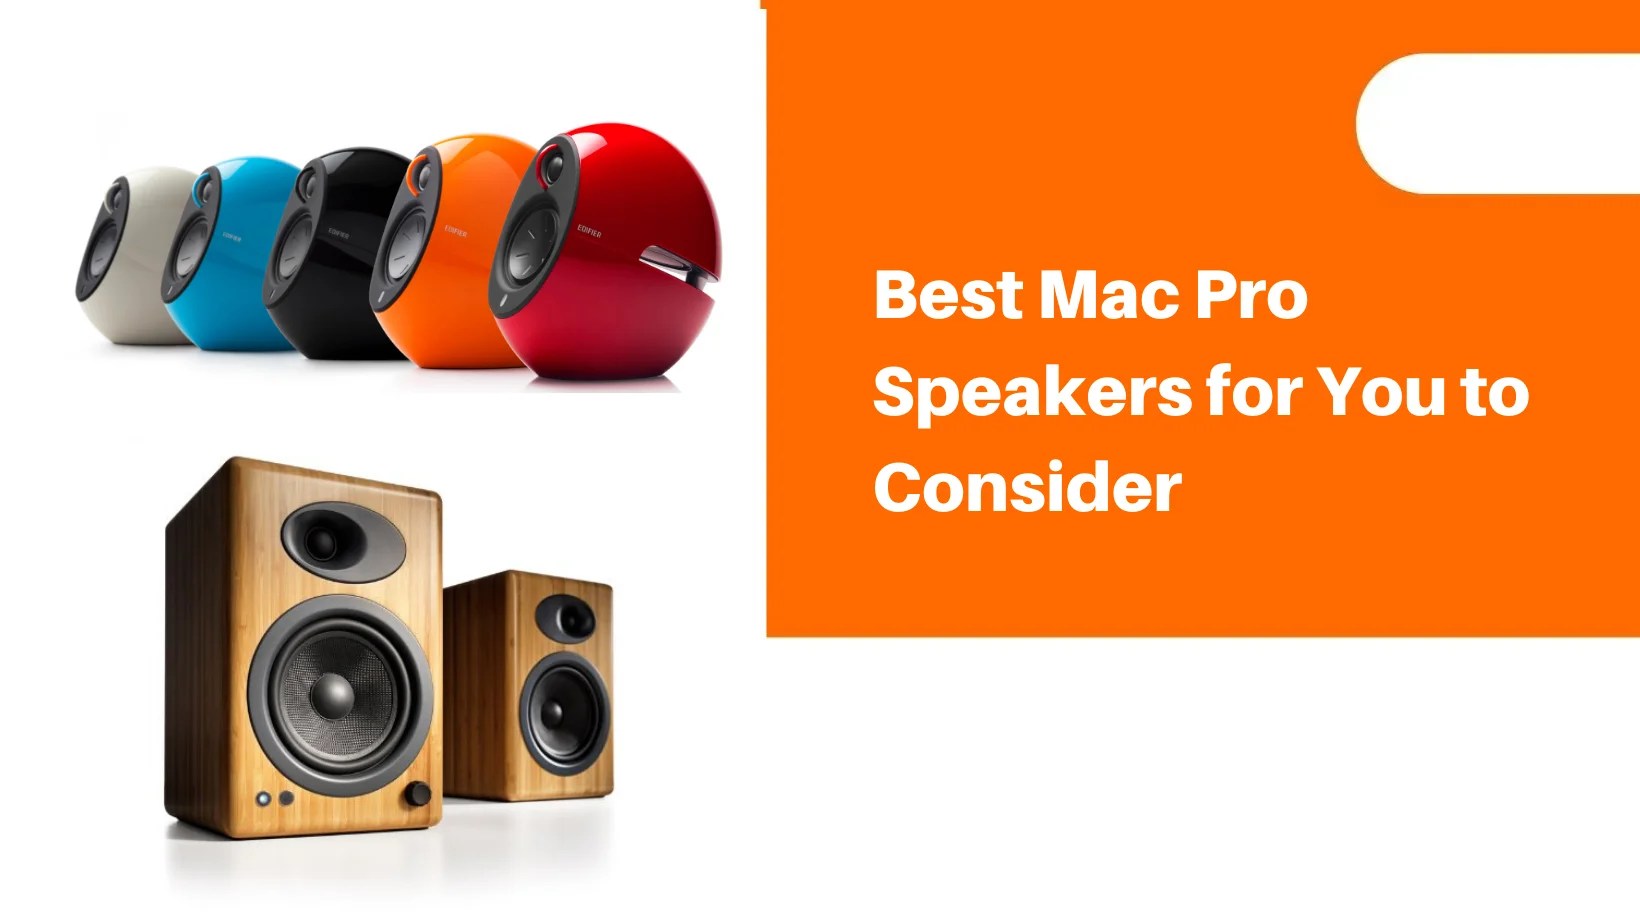 Best Mac Pro Speakers for You to Consider